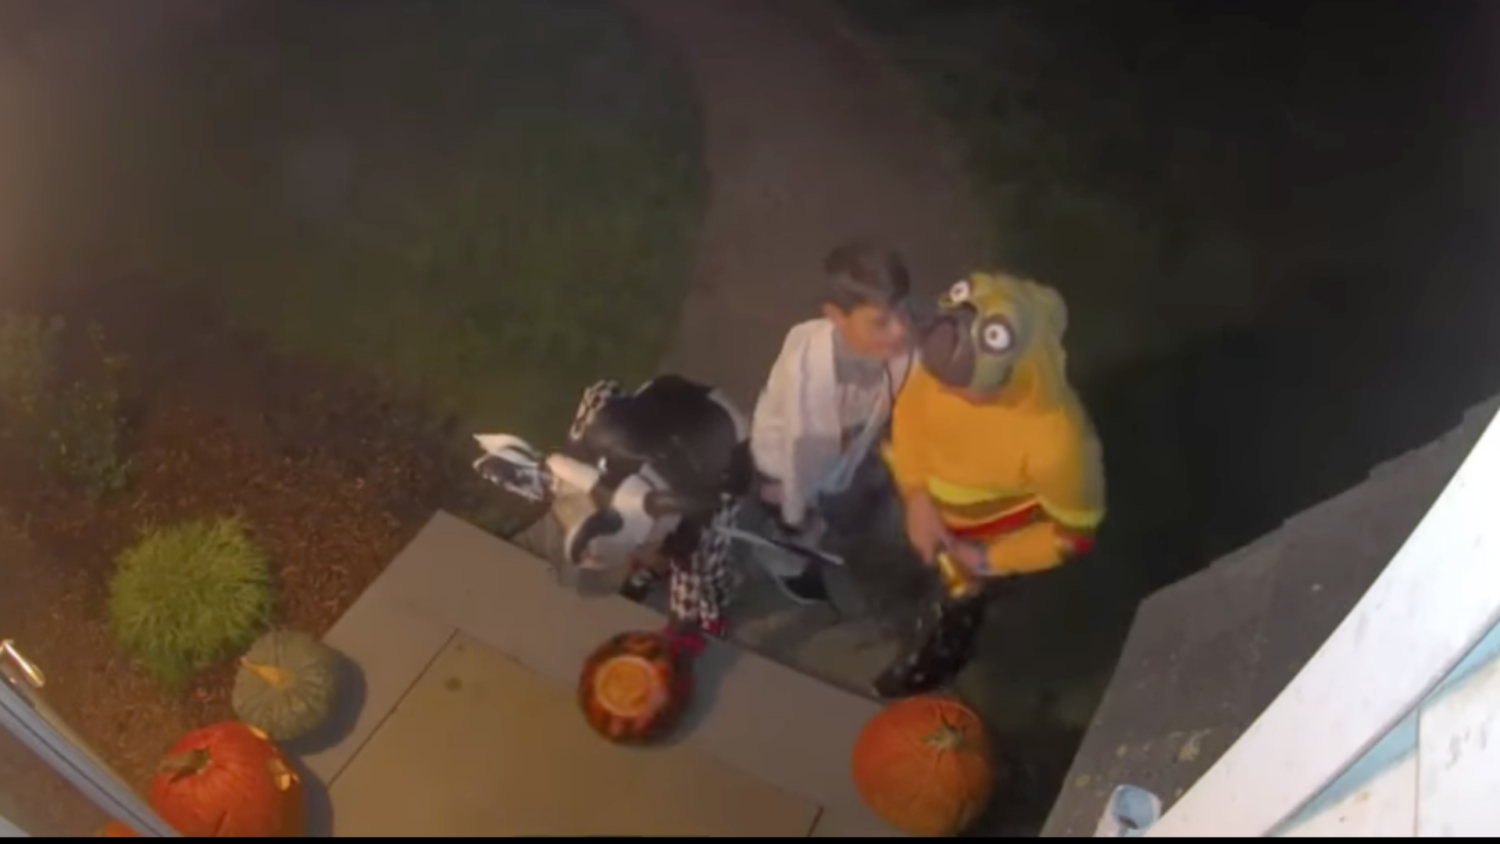 Trick or treaters put candy in bowl in Rhode Island